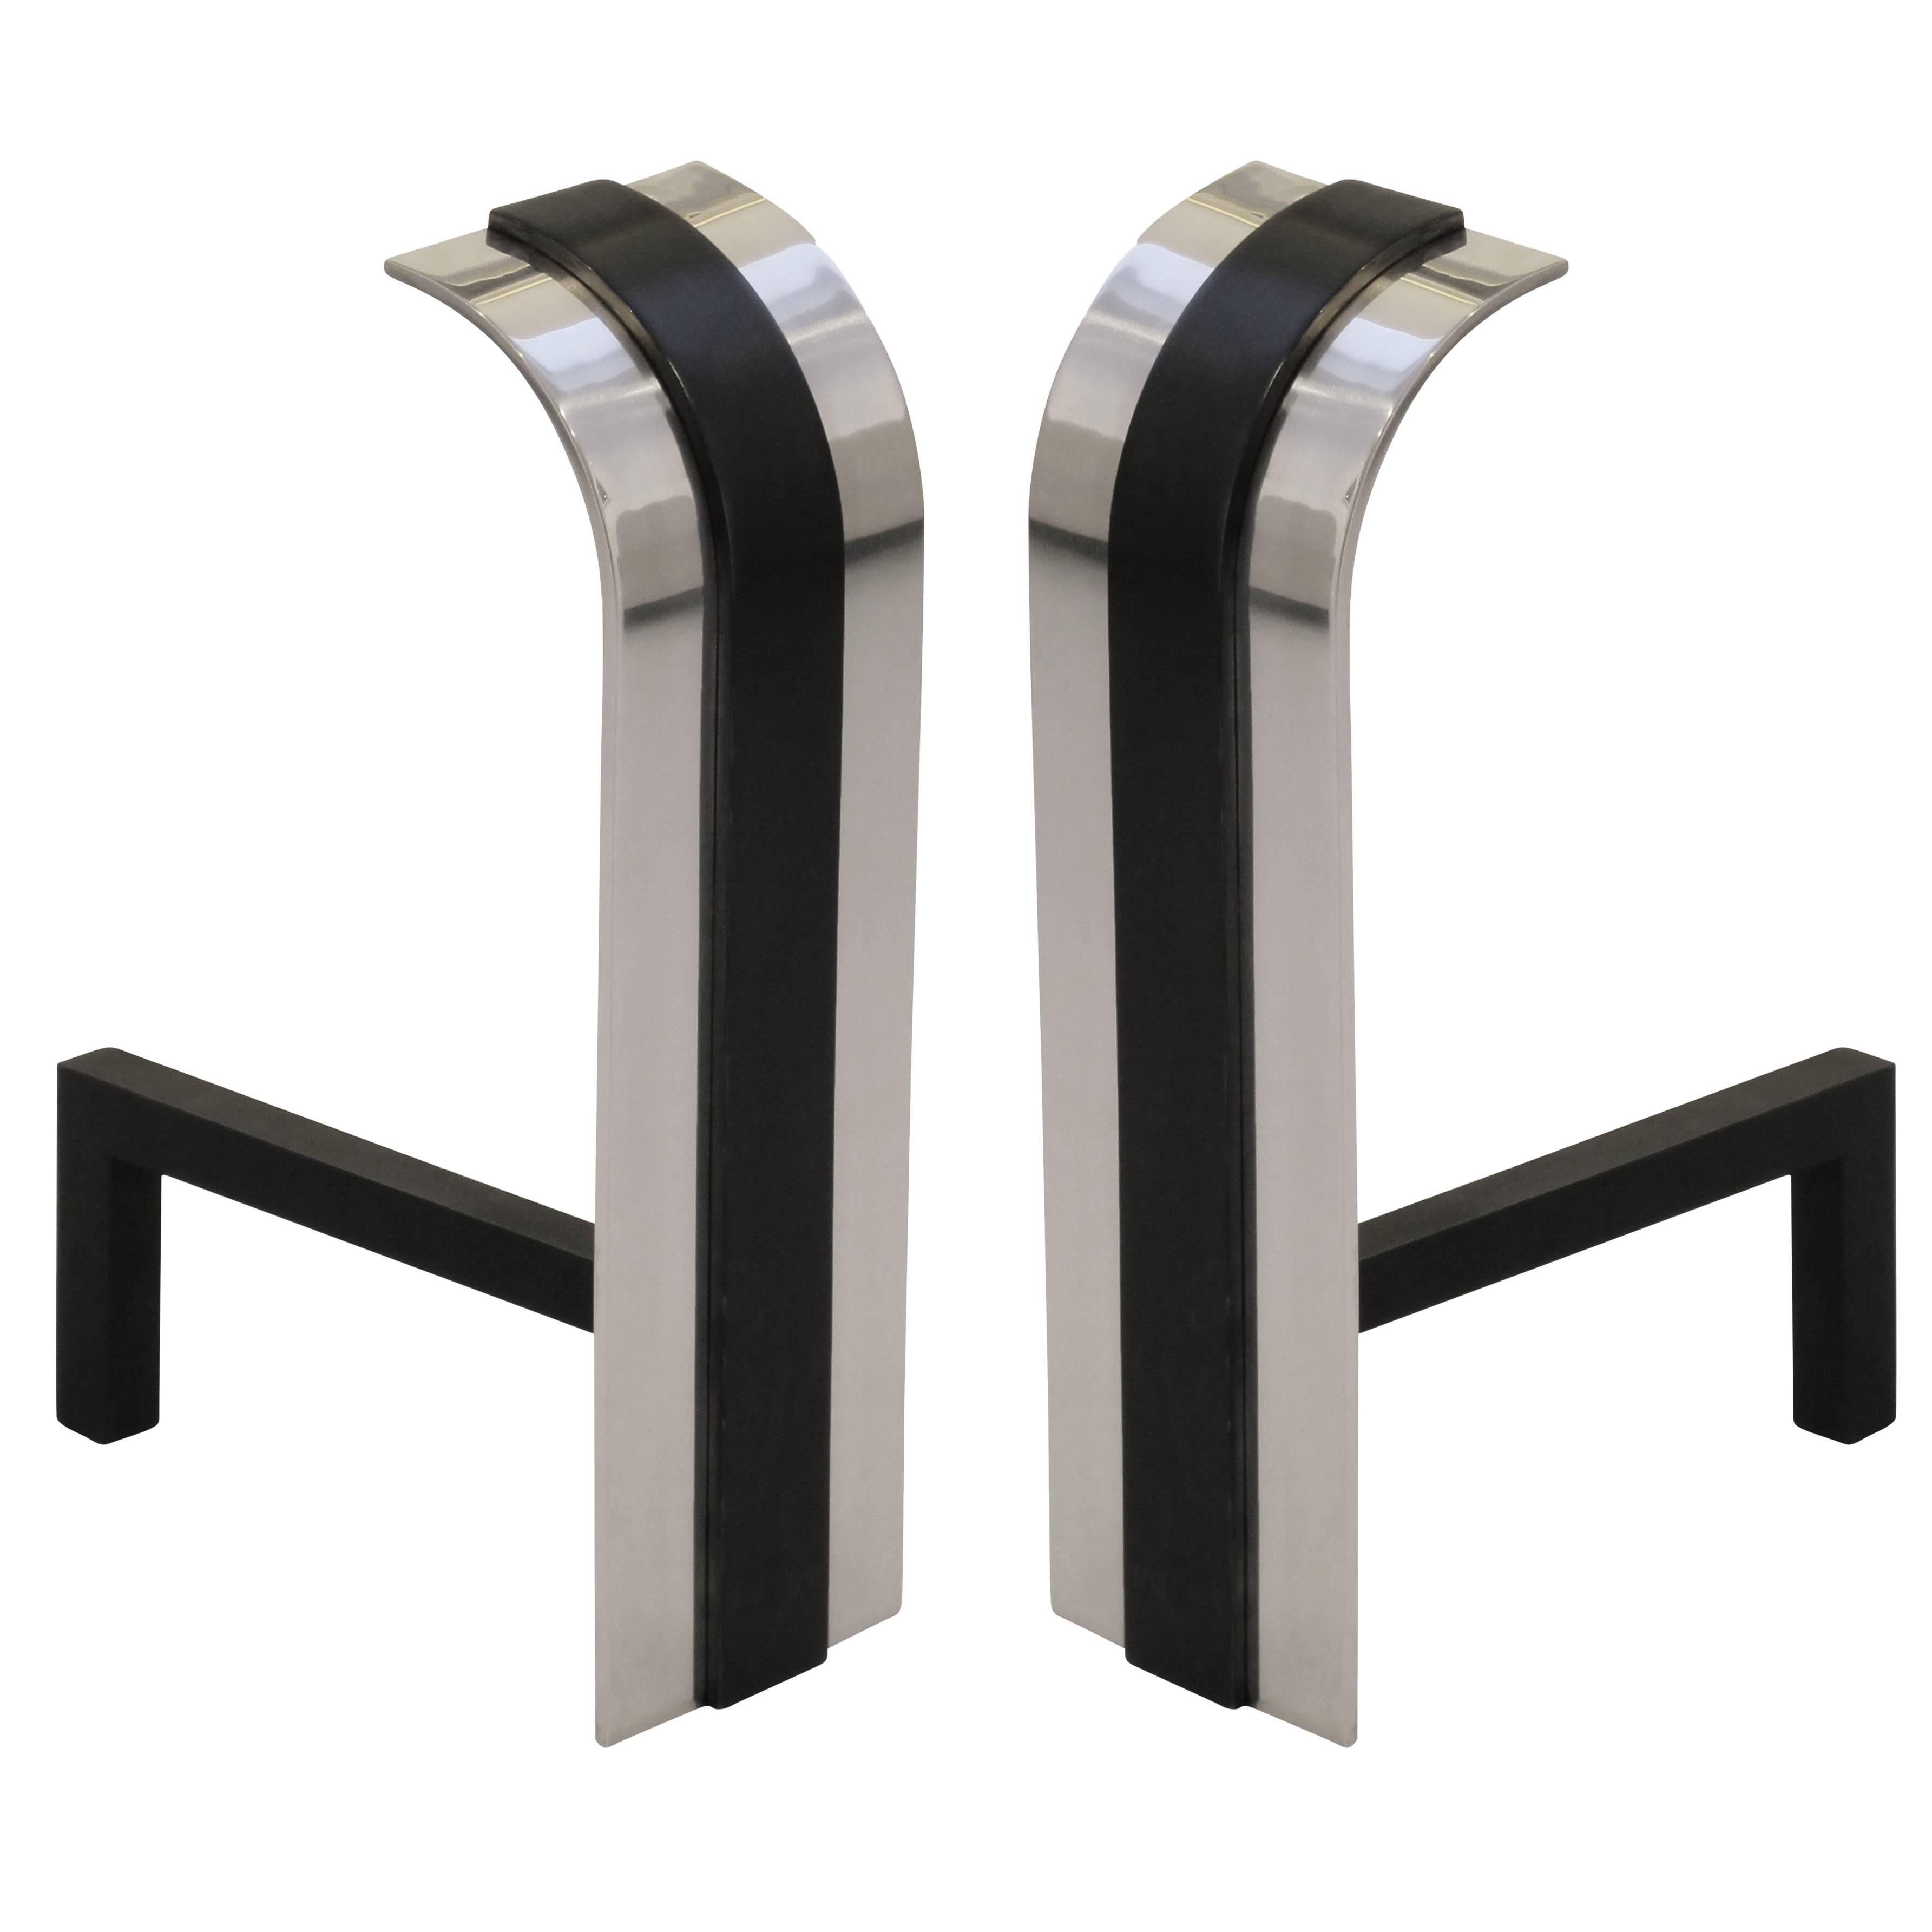 Andirons by Danny Alessandro in Polished Nickel and Matte Black